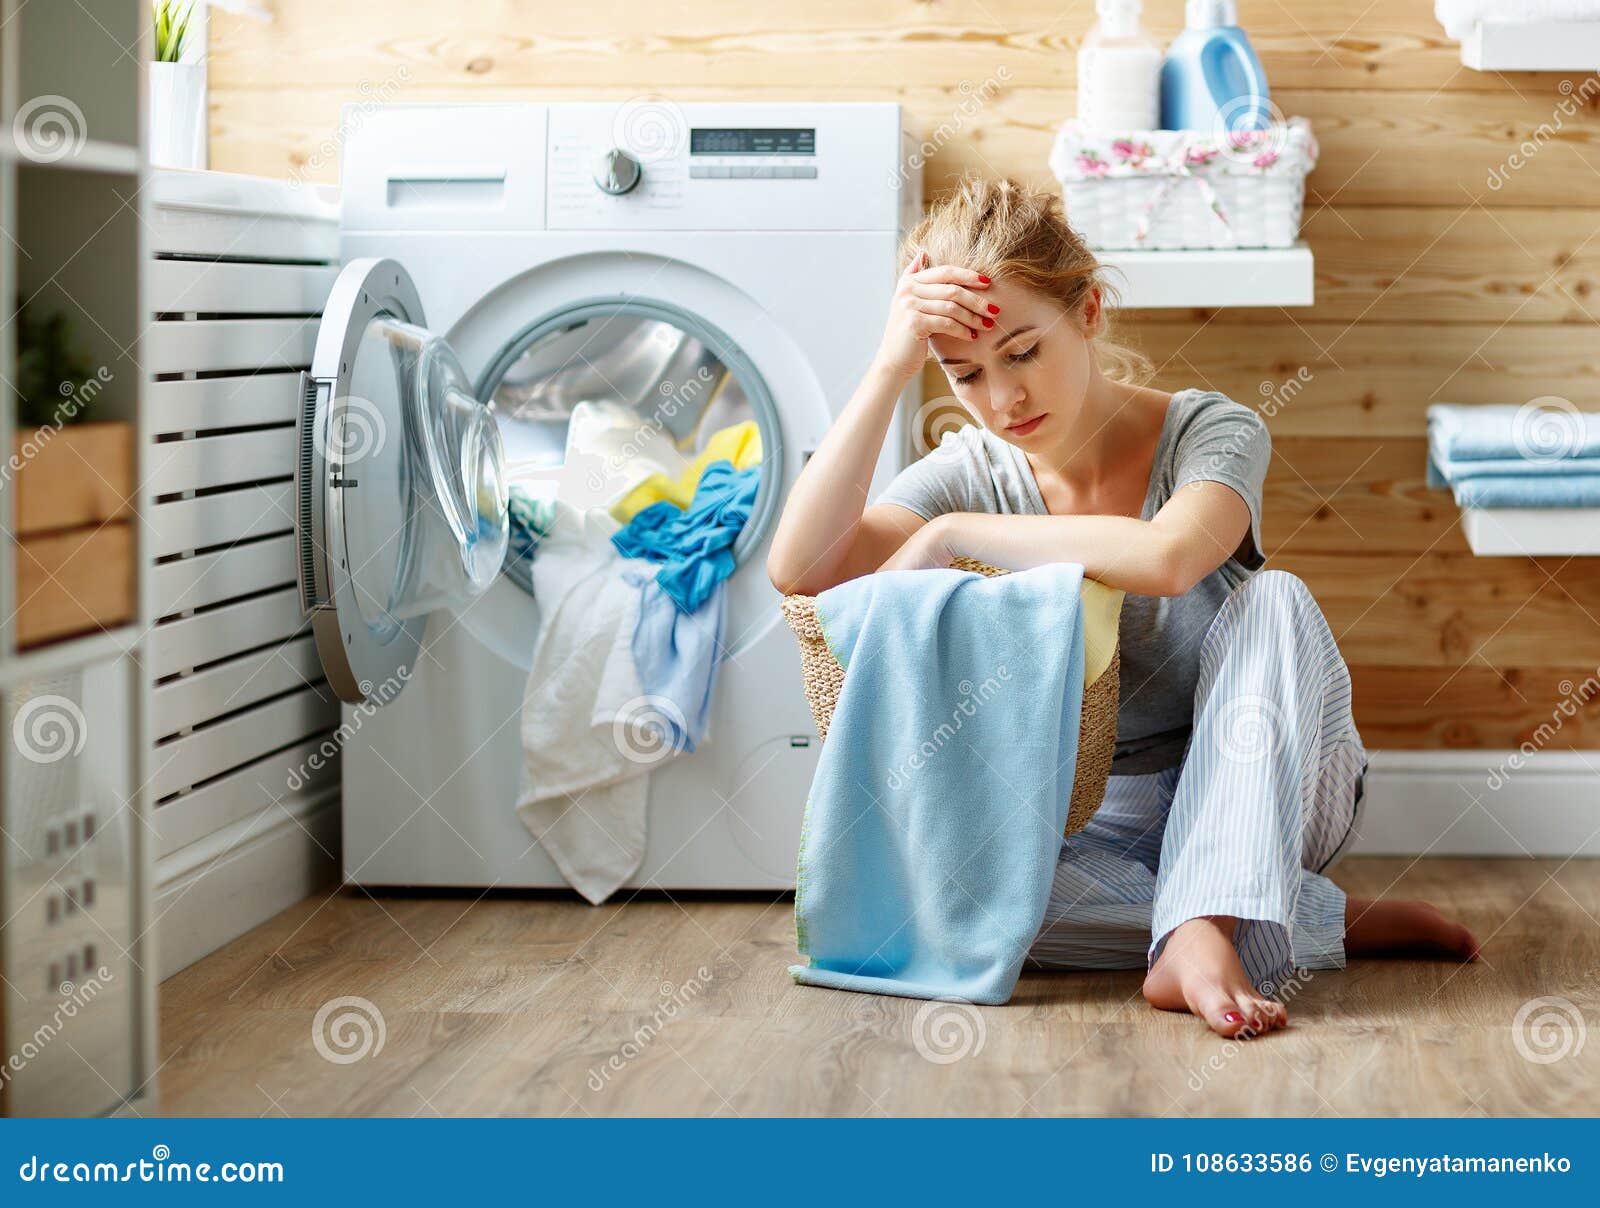 tired housewife woman in stress sleeps in laundry room with washing machine